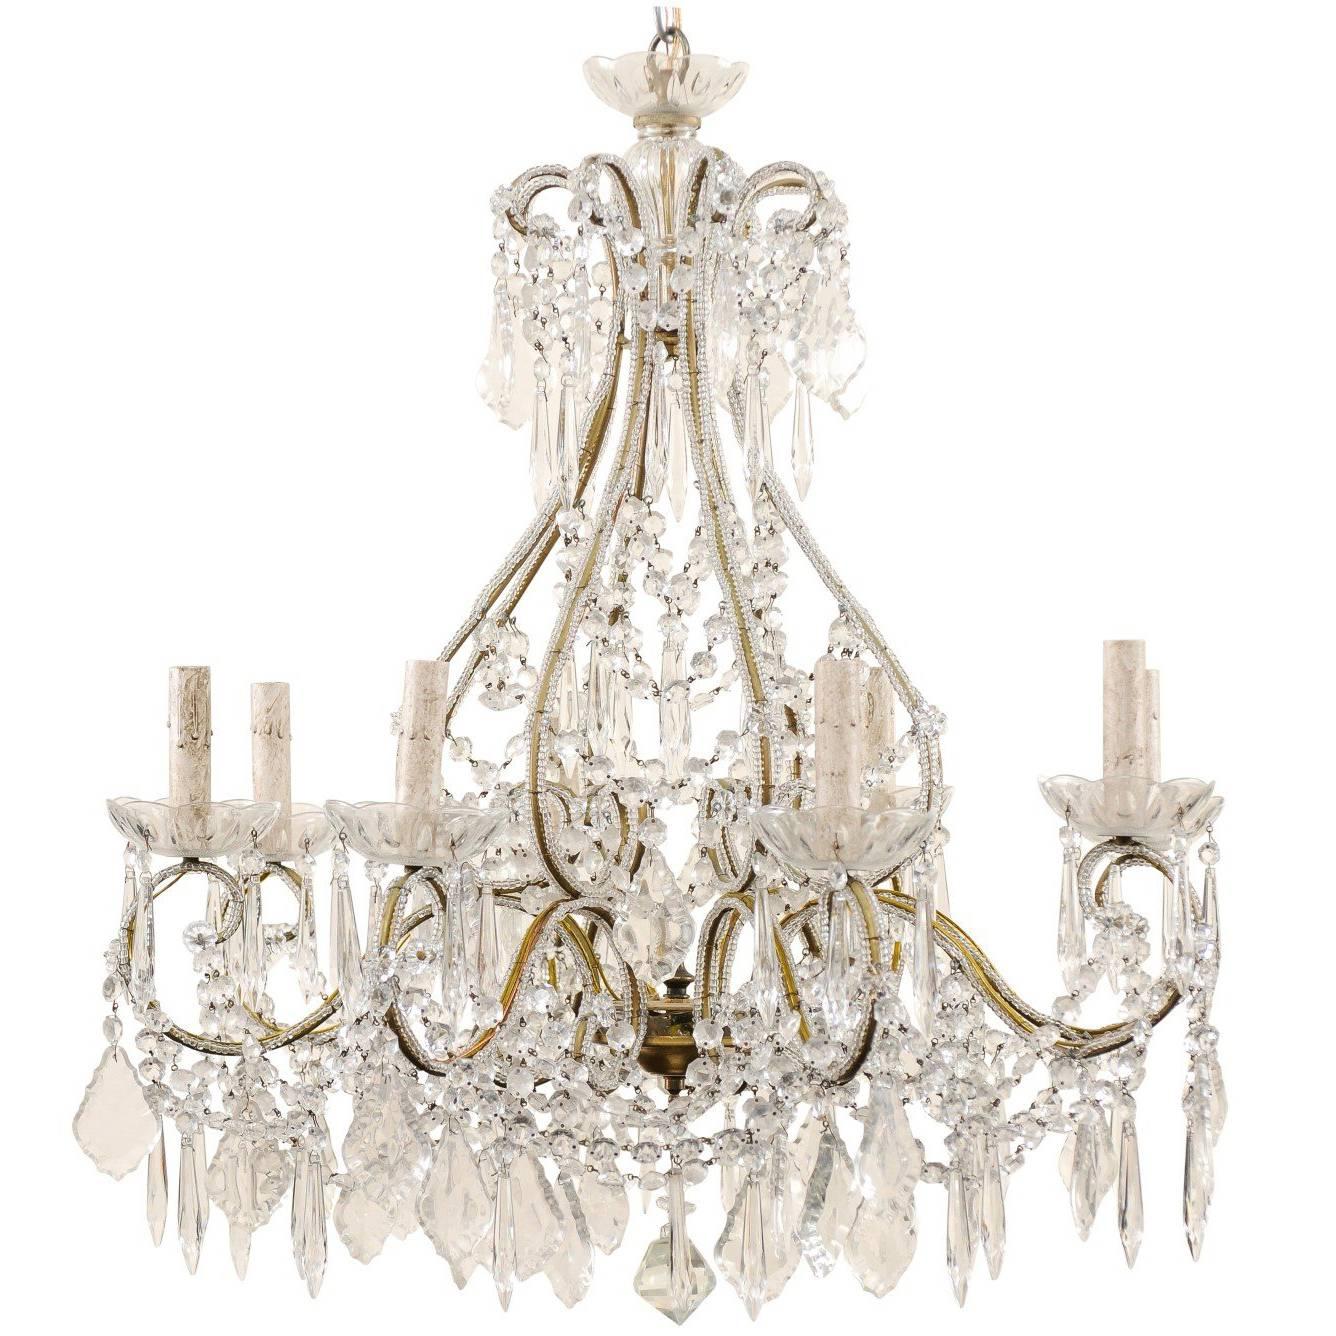 French Mid-20th Century Crystal Chandelier with Gilded and Beaded Armature